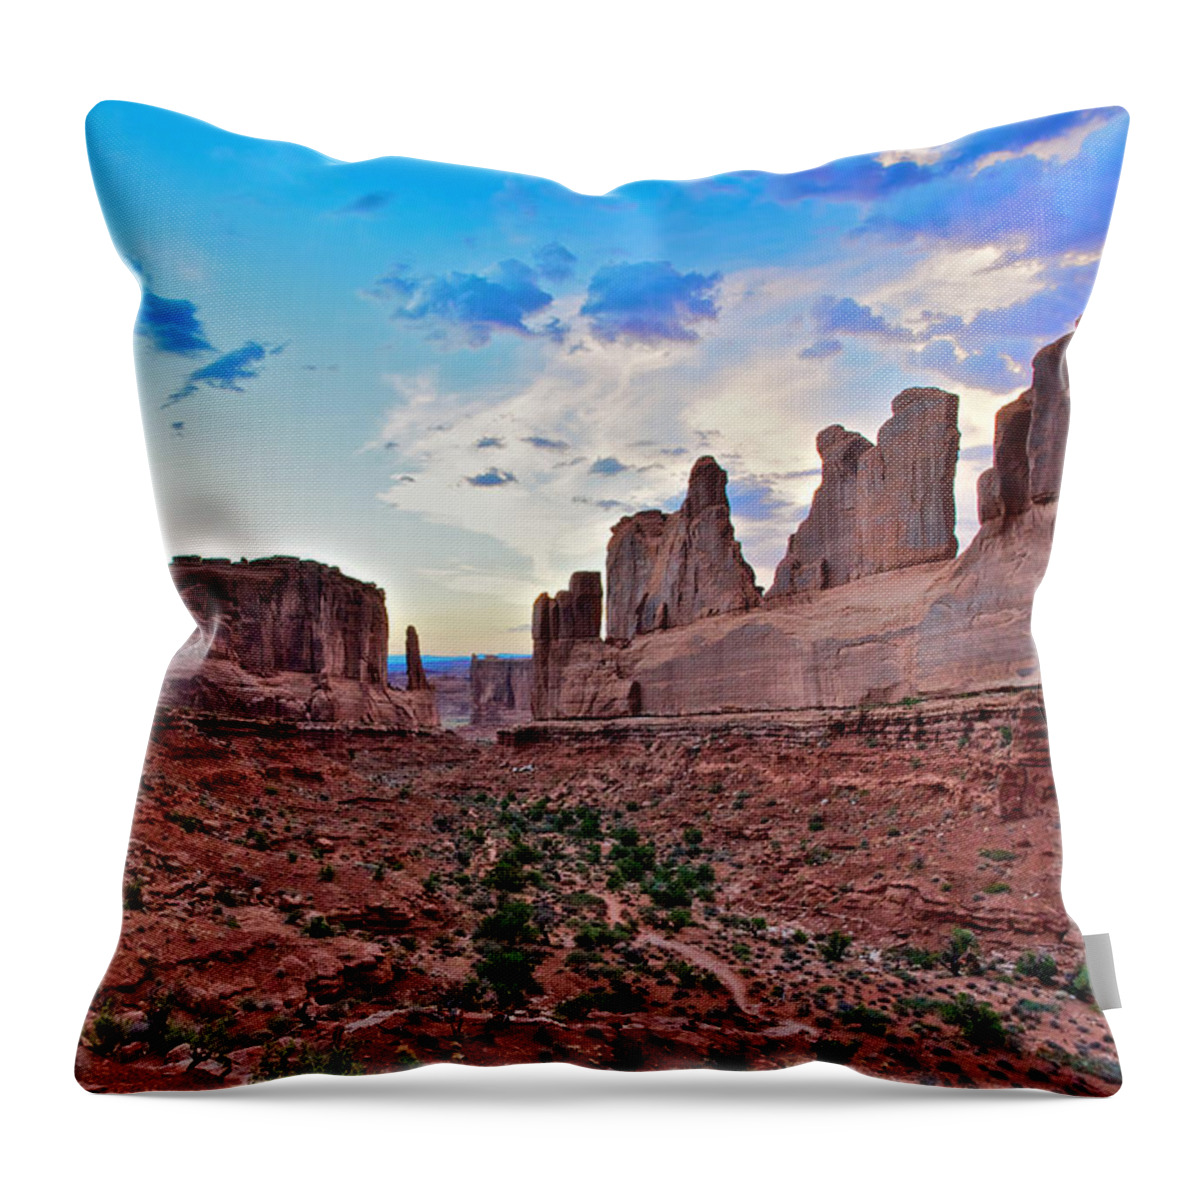 Arches National Park Throw Pillow featuring the photograph Arches National Park, Utah by John Daly